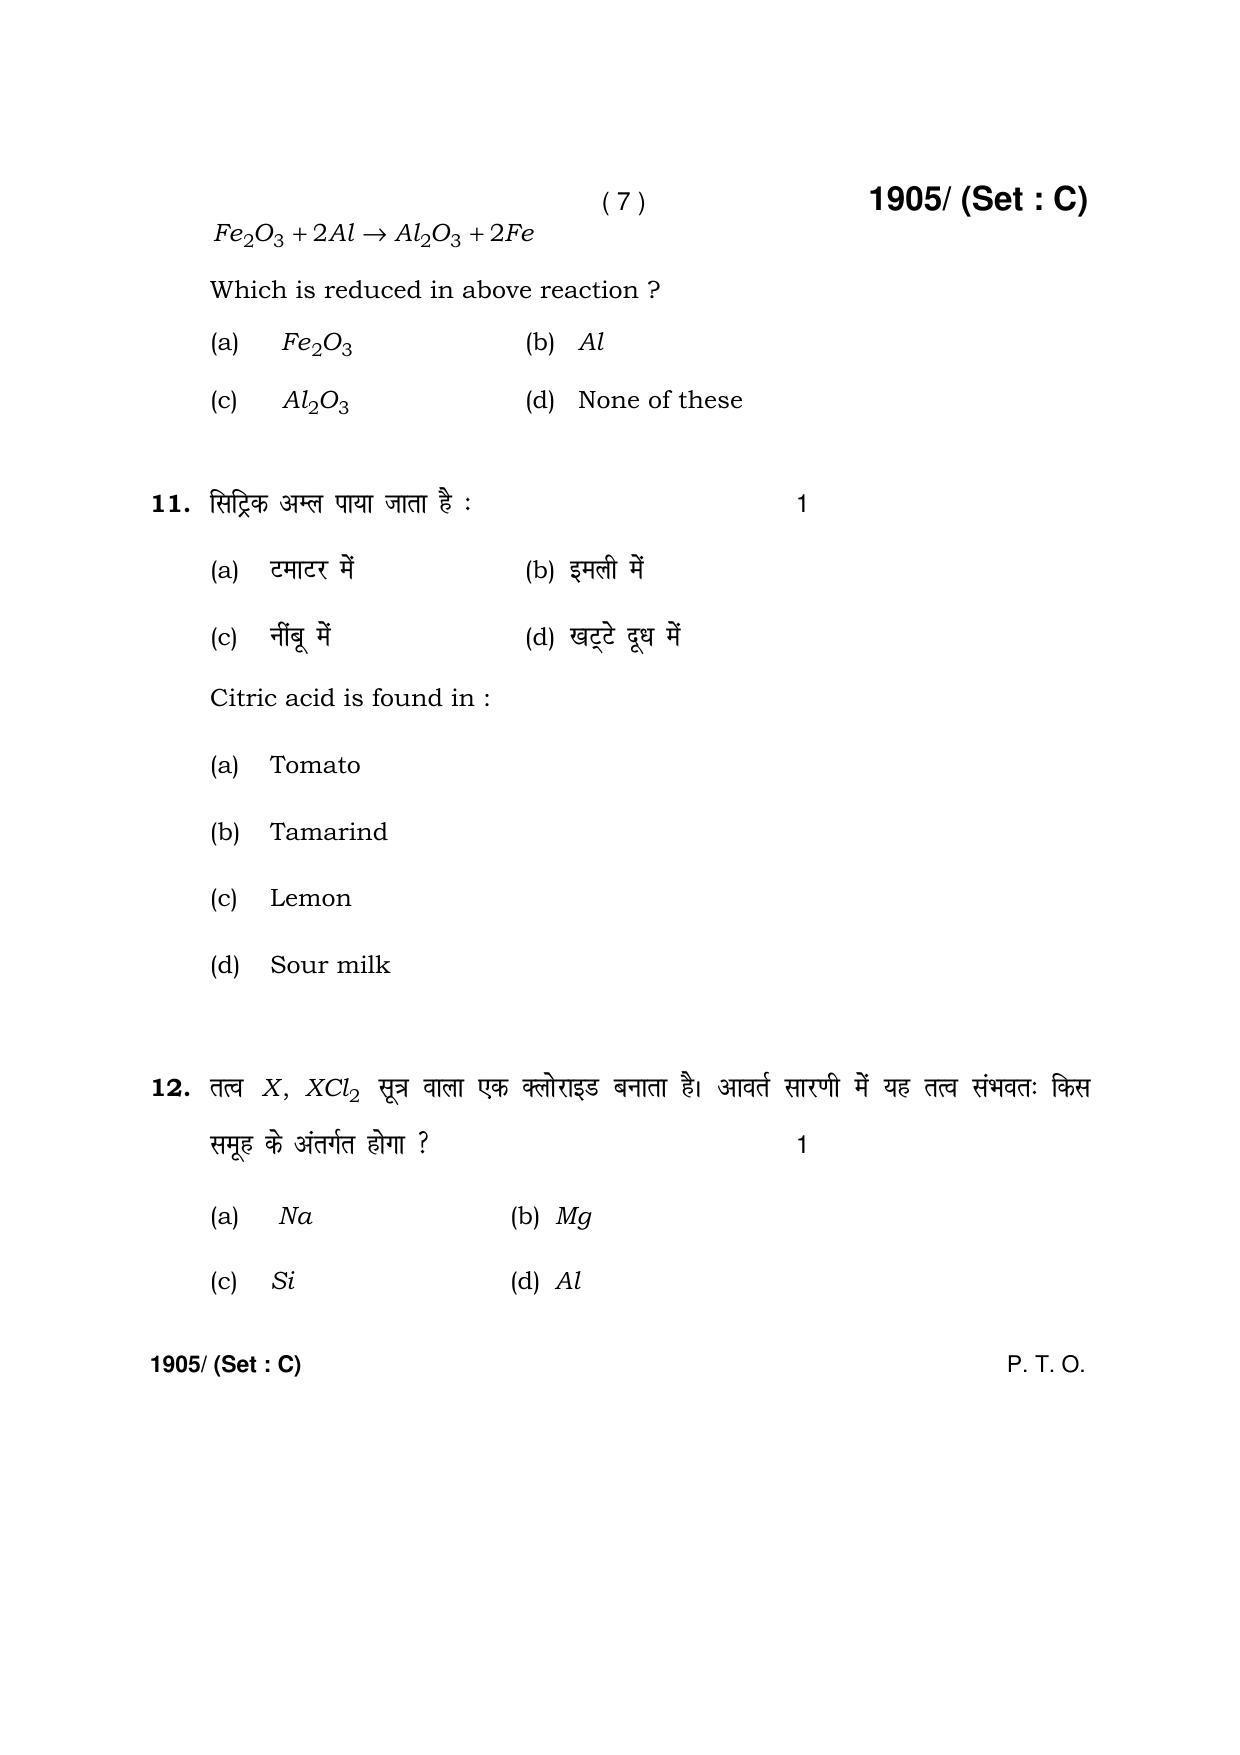 Haryana Board HBSE Class 10 Science -C 2017 Question Paper - Page 7